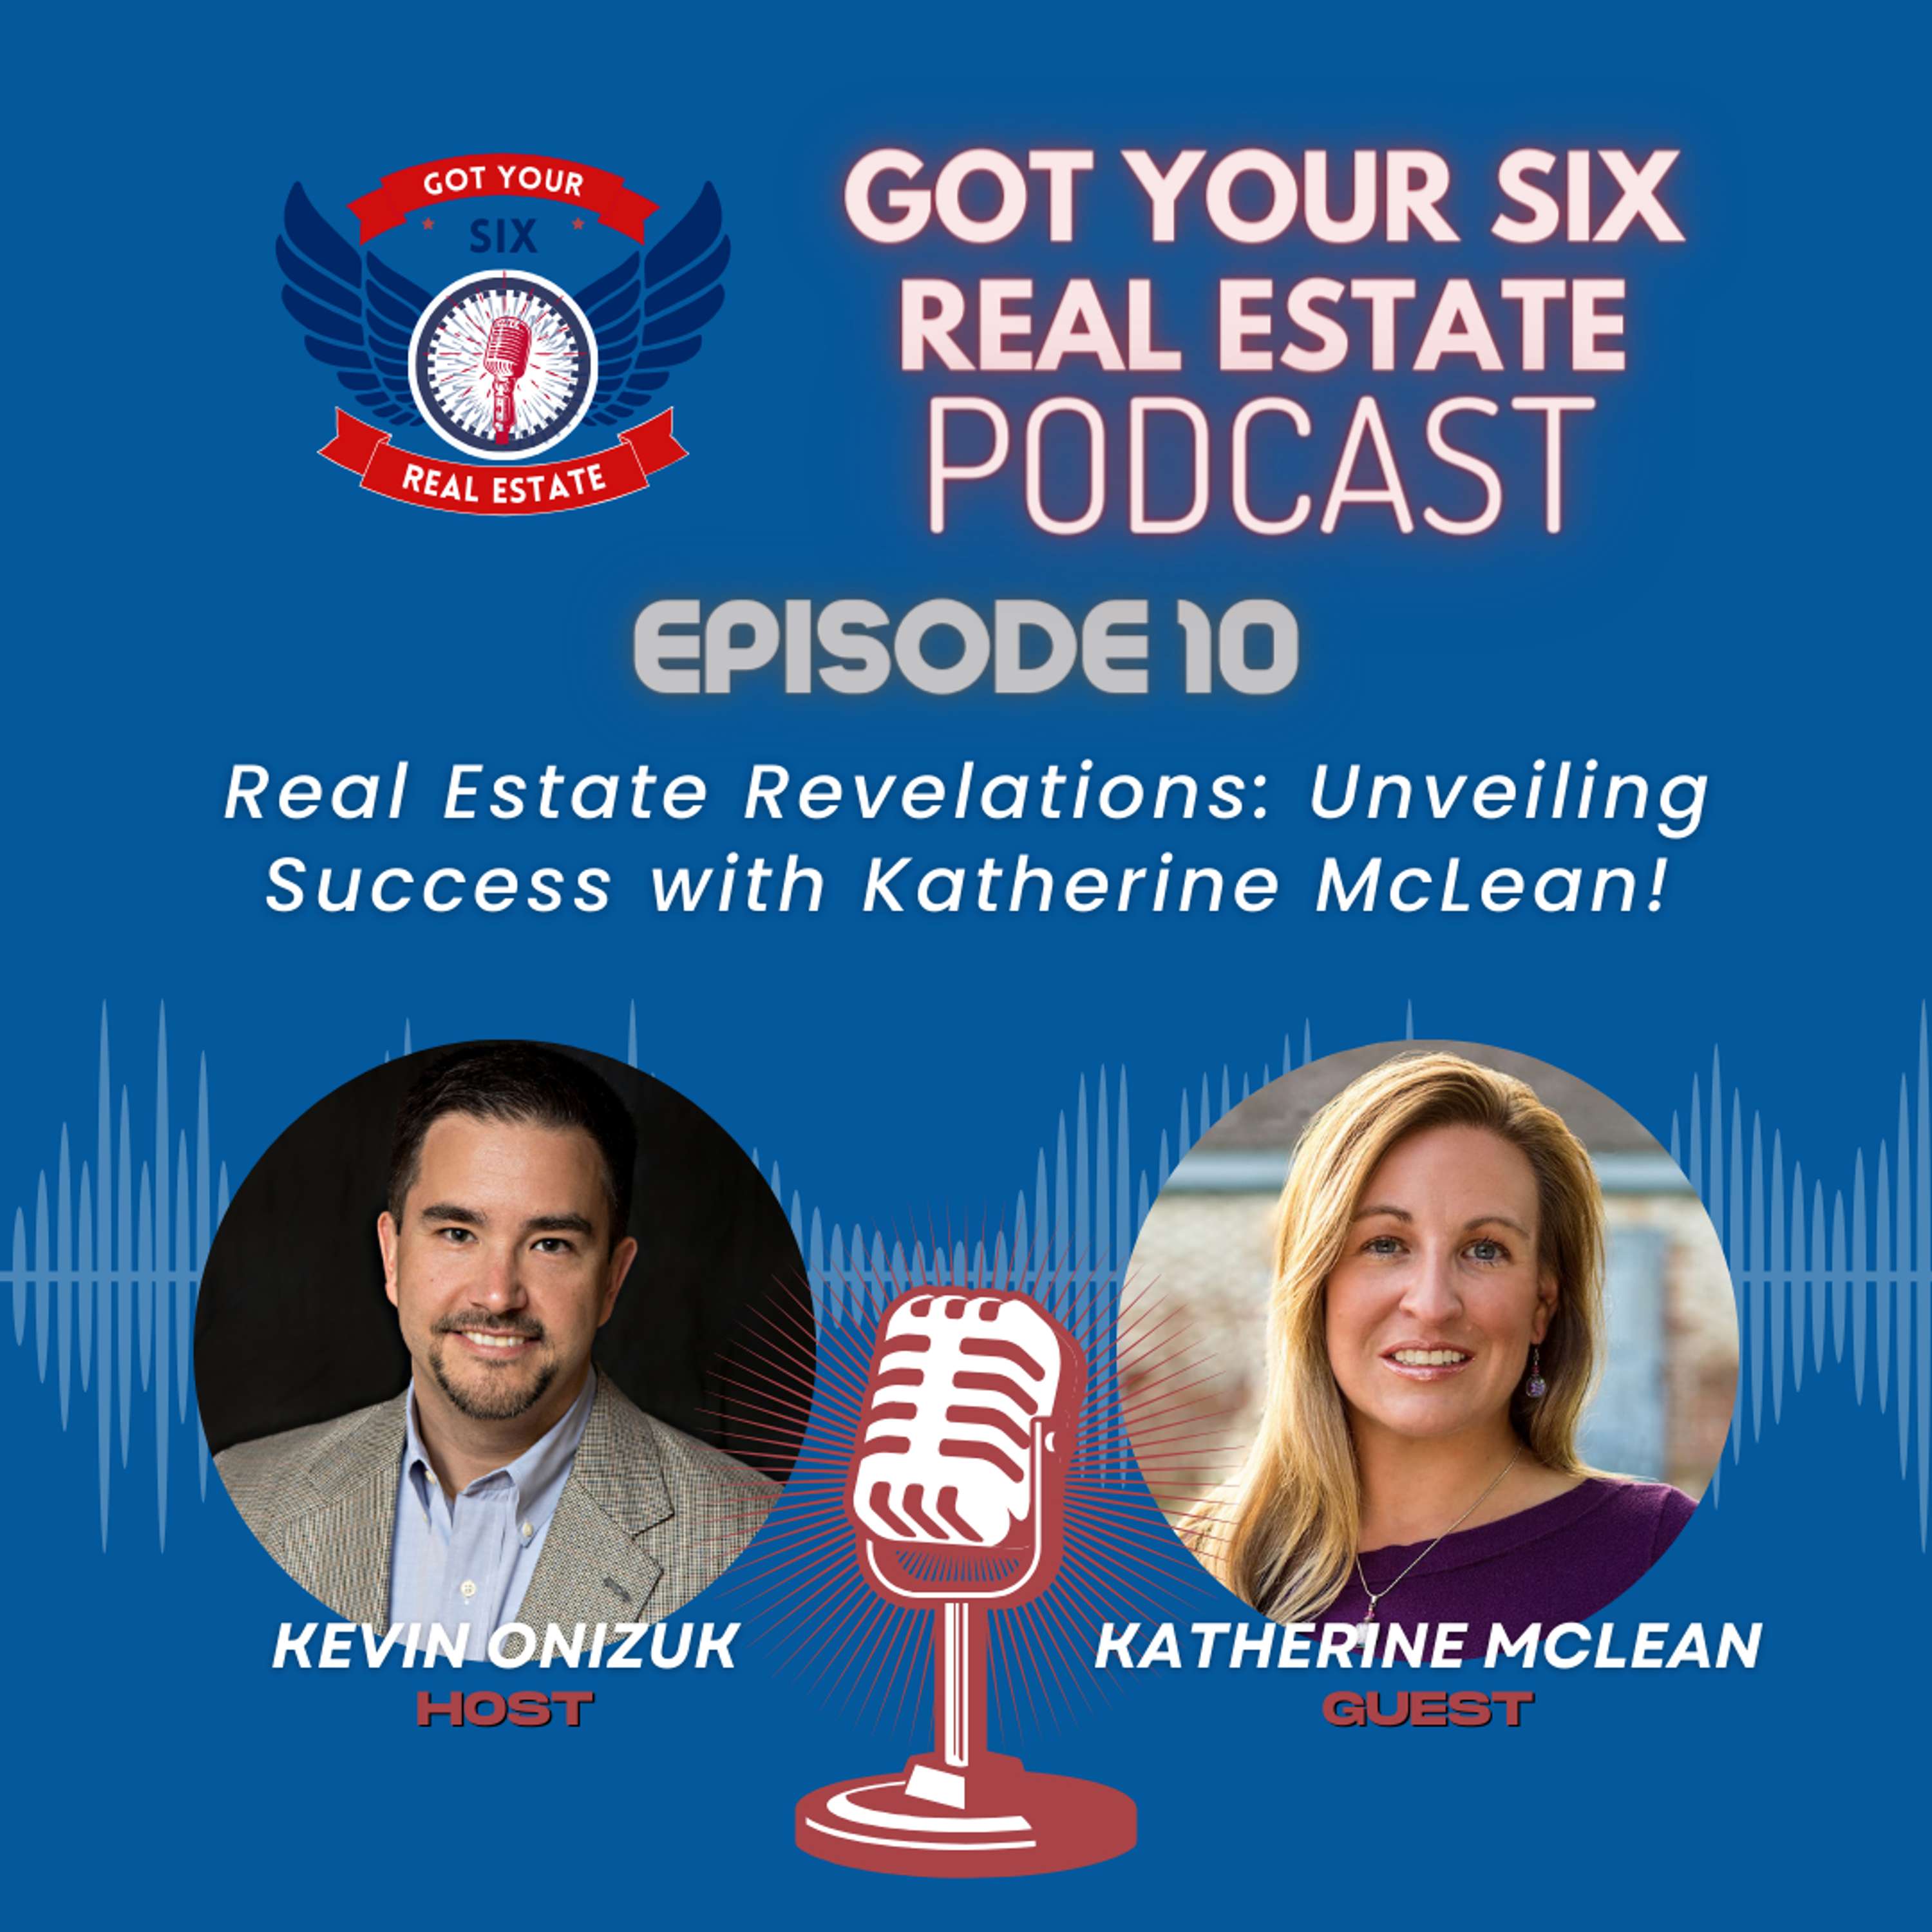 Episode 10: Real Estate Revelations: Unveiling Success with Katherine McLean!